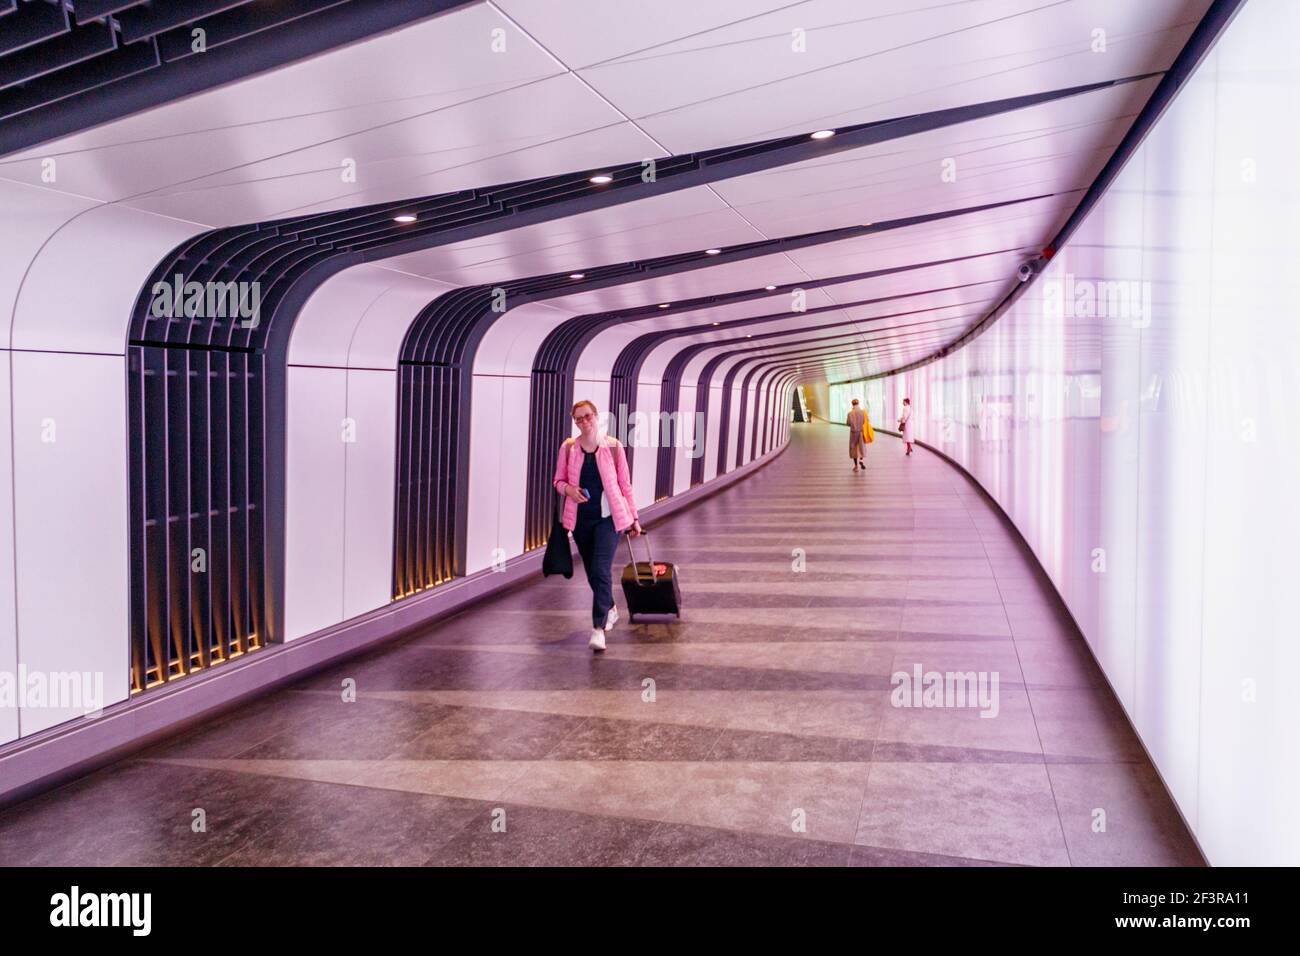 A oman pulling a wheeled suitcase in the underground pedestrian tunnel and lightwall leading from from King's Place to King's Cross-St Pancras Station Stock Photo